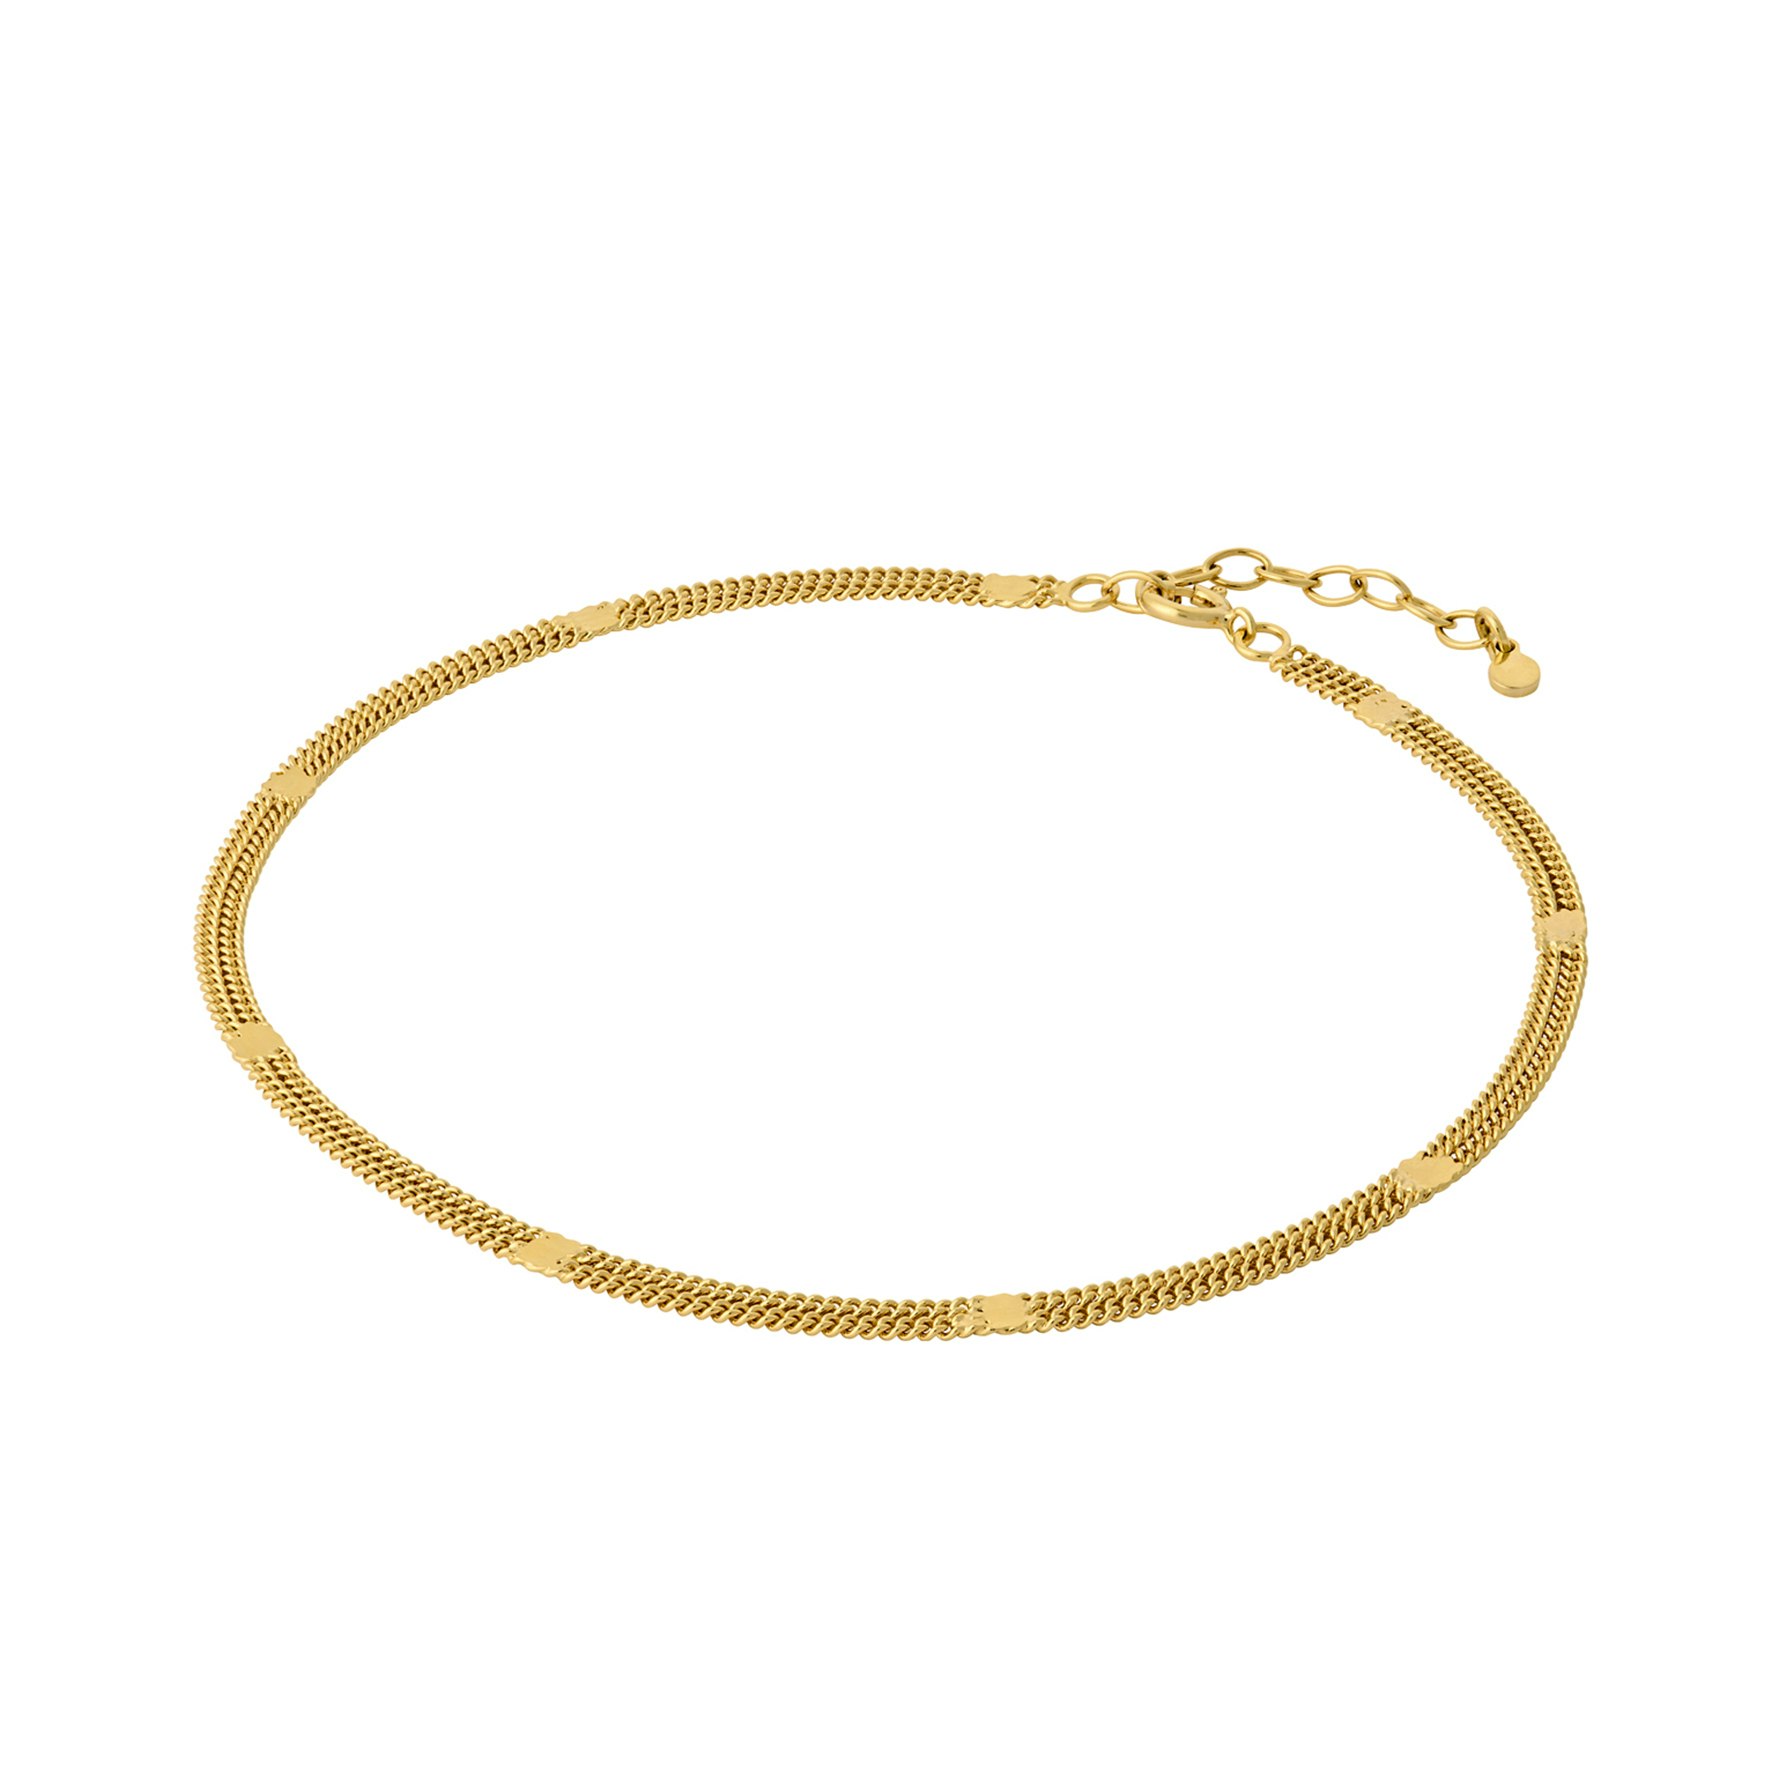 Agnes Anklet from Pernille Corydon in Goldplated-Silver Sterling 925